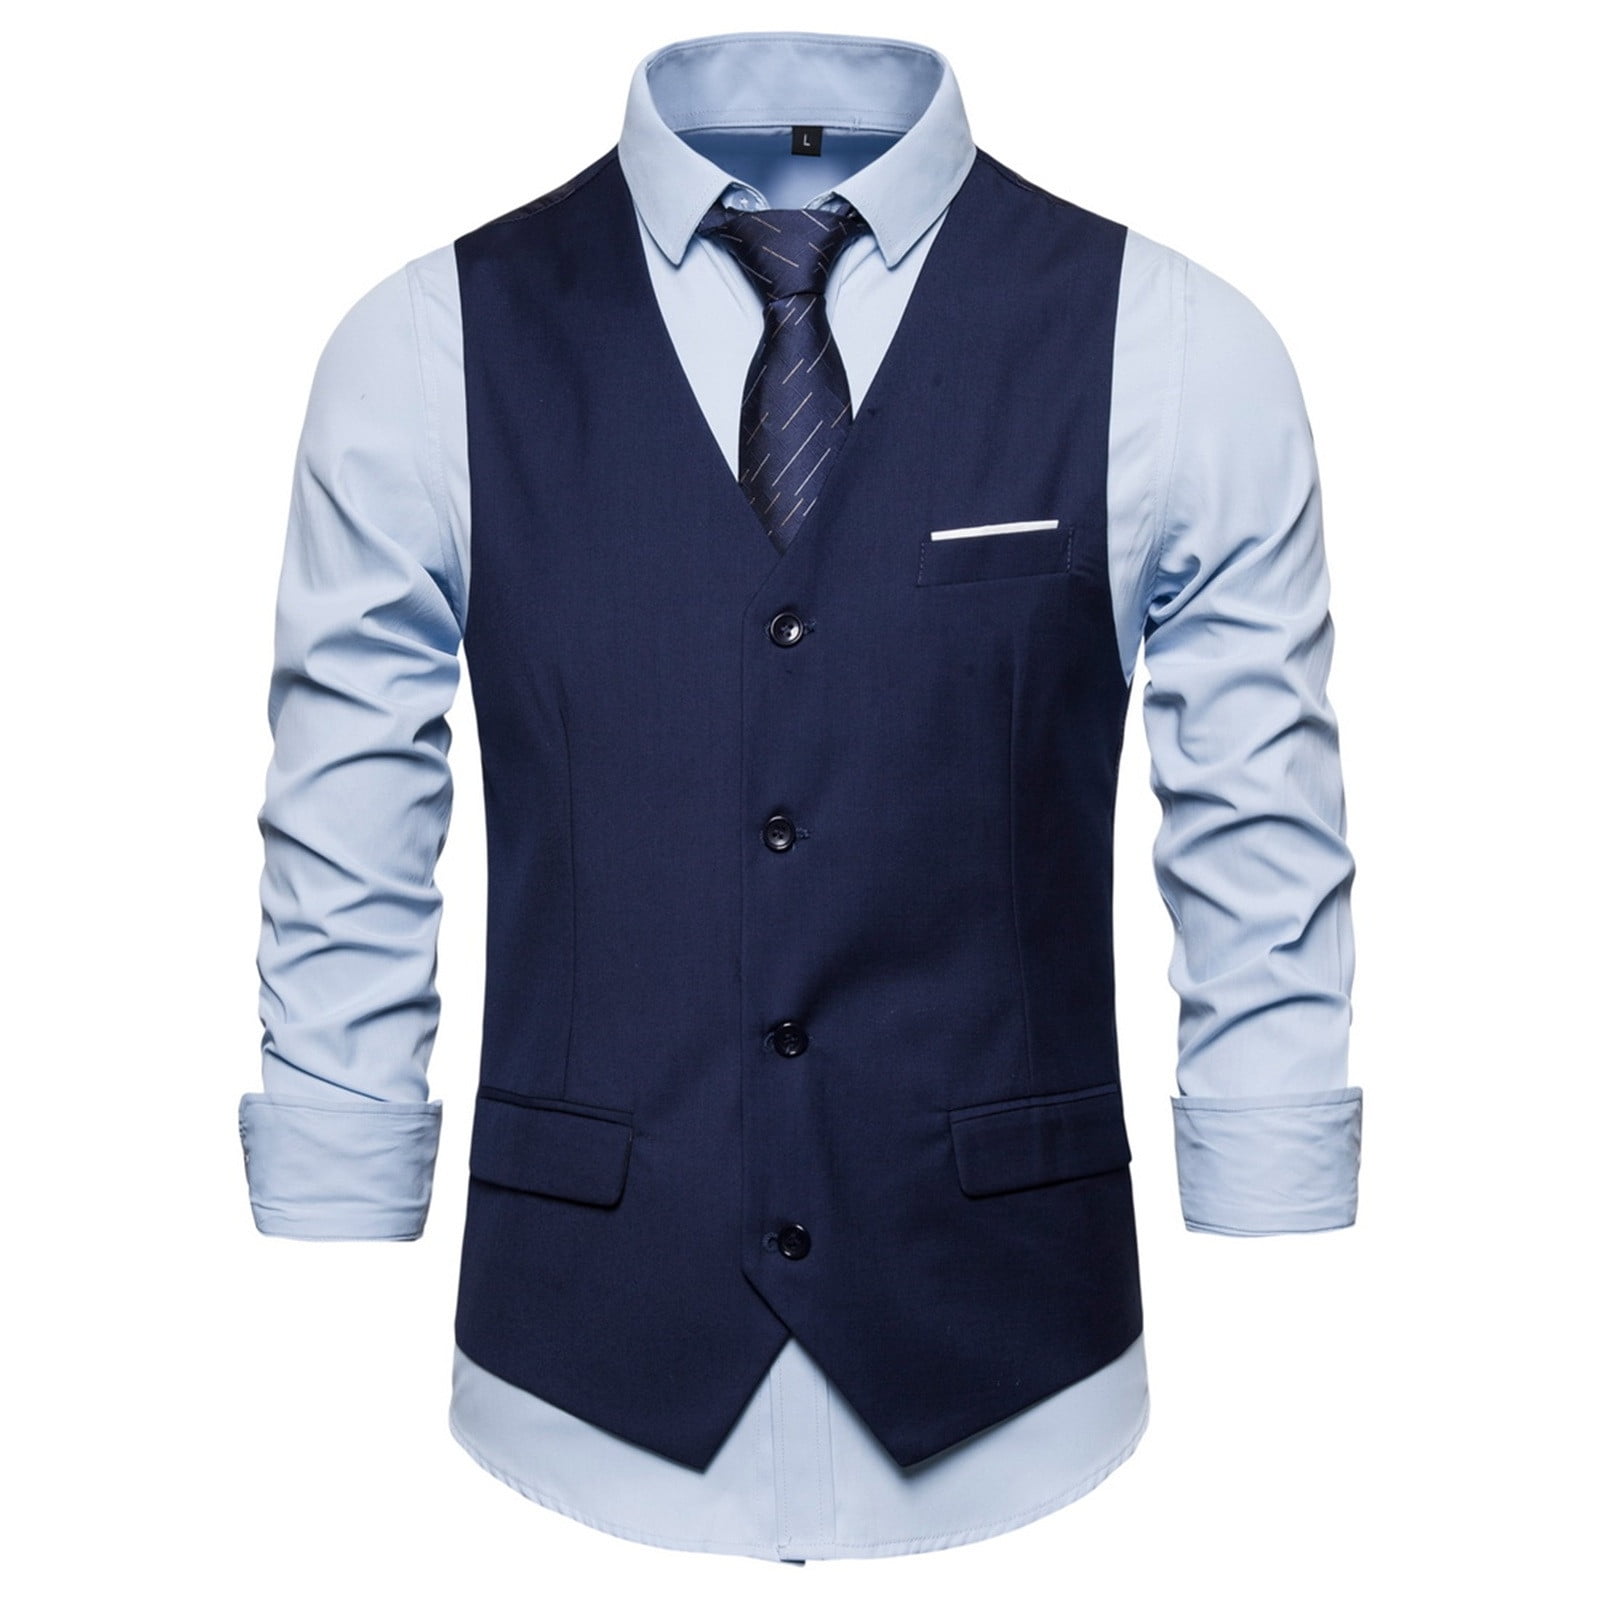 BELLZELY Blazers for Clearance Spring Tuxedo Spring Men\'s Waistcoat Coat and Big Bussiness Jacket Formal Men Suit Vest Top Tall